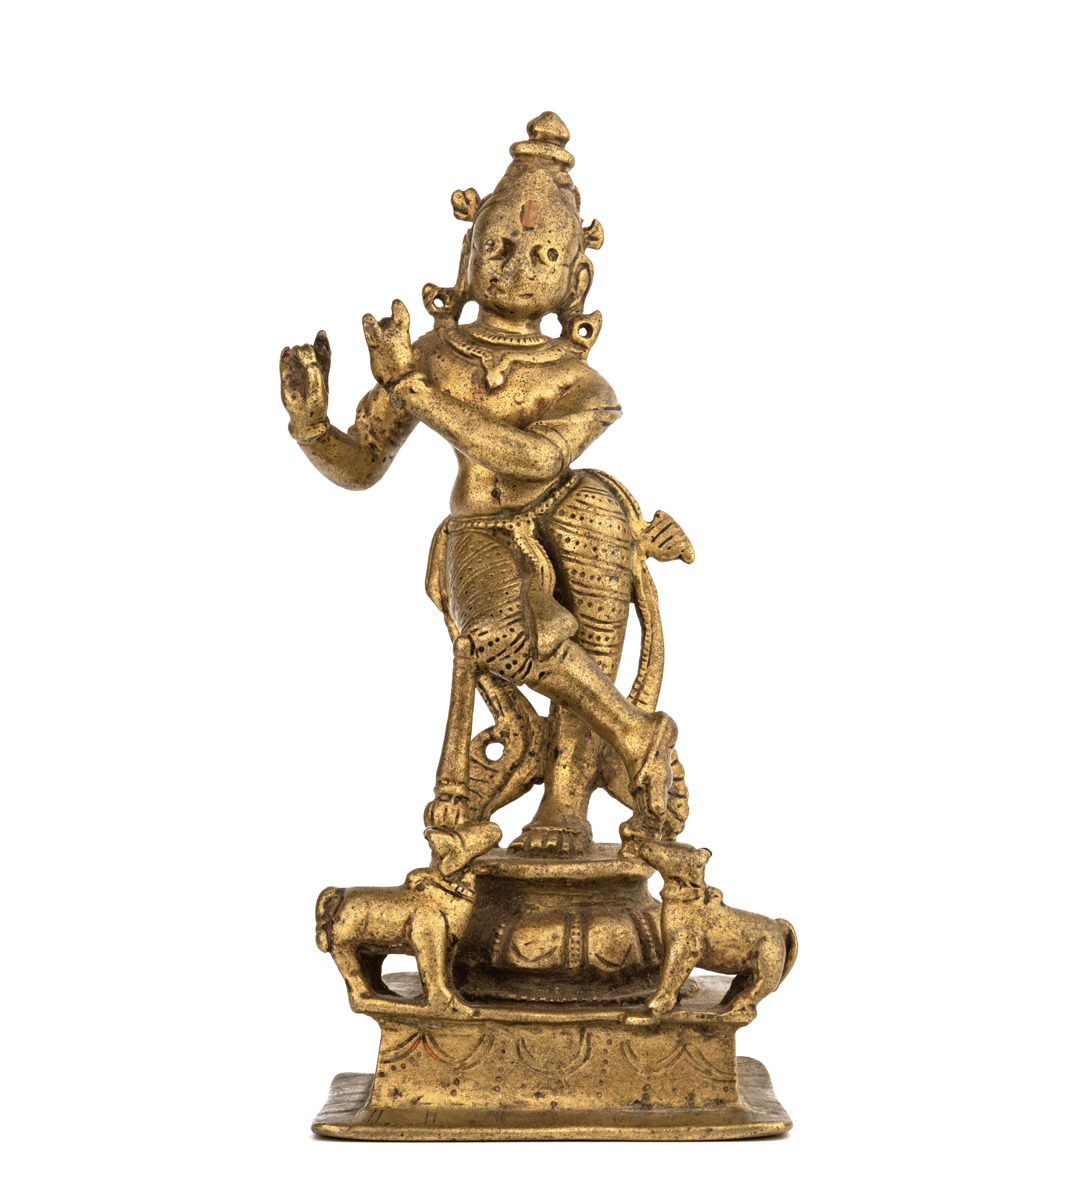 An 18th Century Copper Alloy South Indian Krishna Sculpture